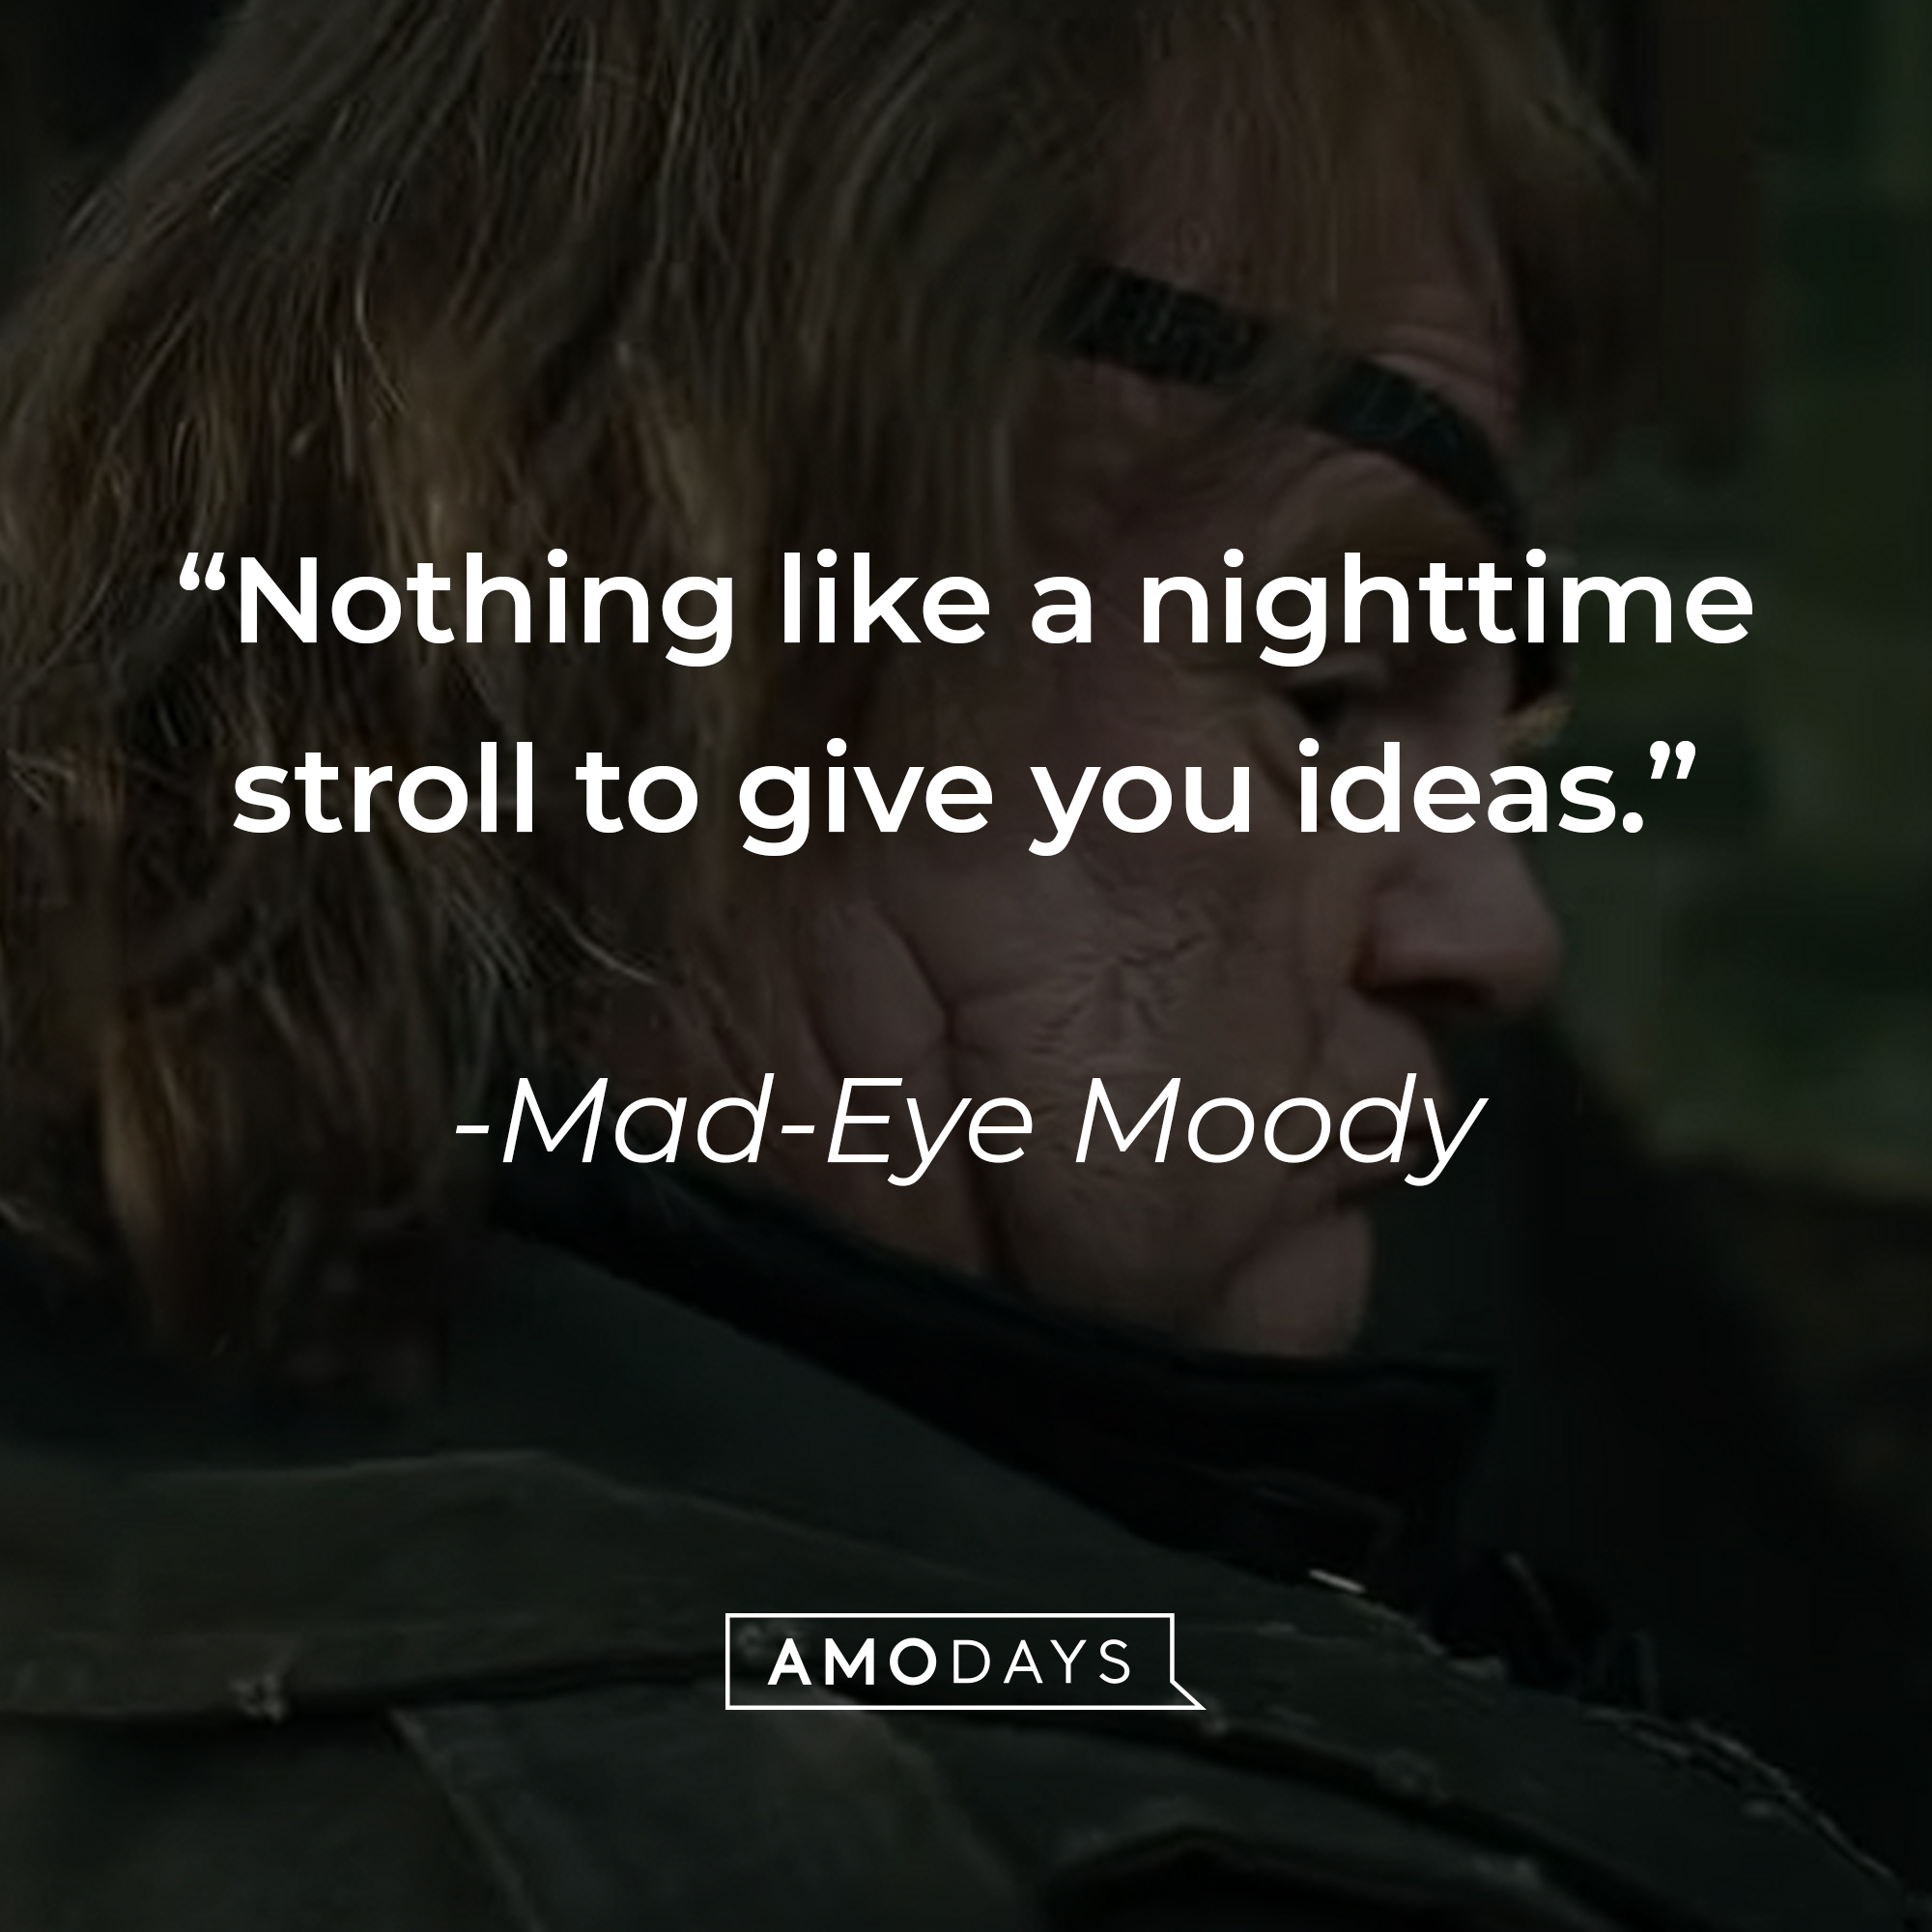 Mad-Eye Moody's quote: "Nothing like a nighttime stroll to give you ideas." | Source: youtube.com/harrypotter